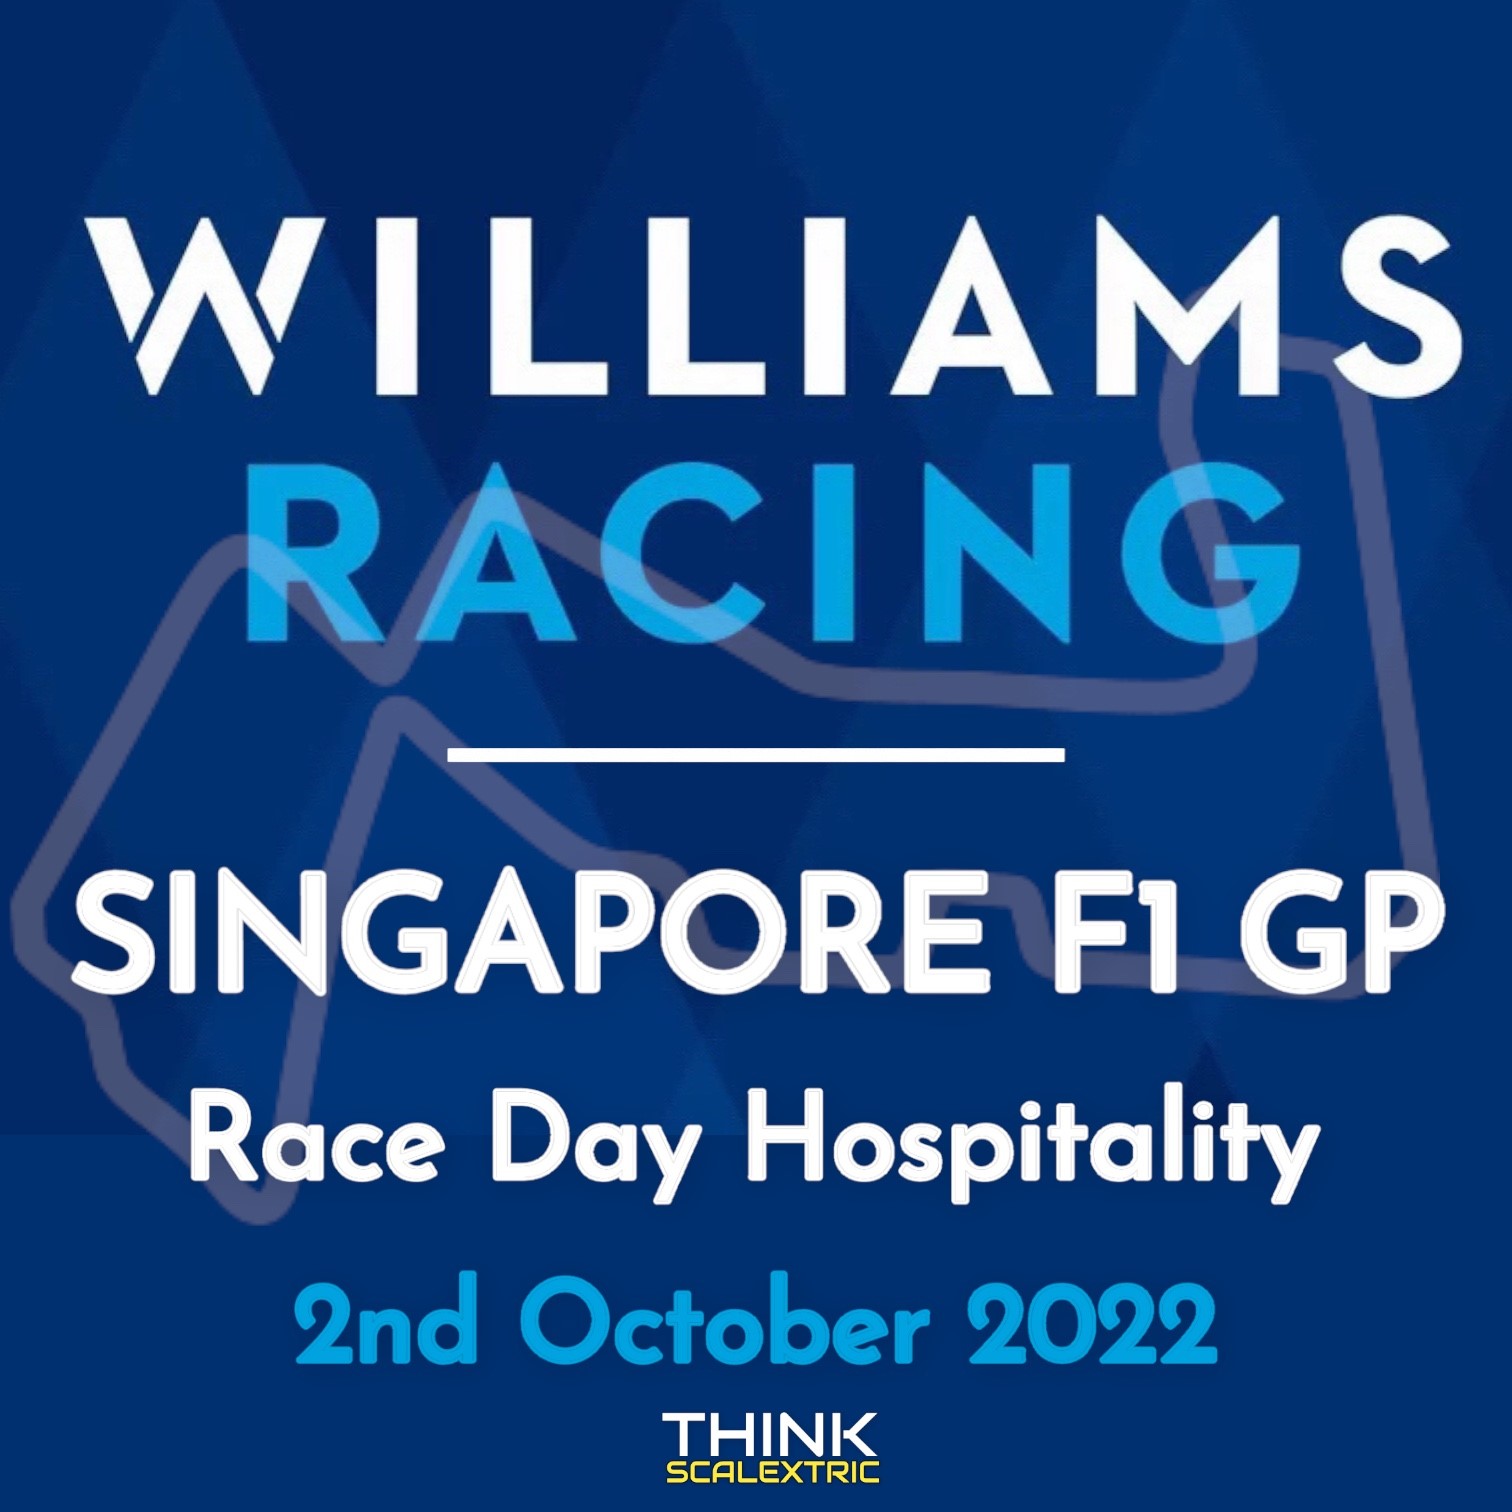 williams racing race day hospitality singapore f1 gp 2022 giant scalextric bespoke track build